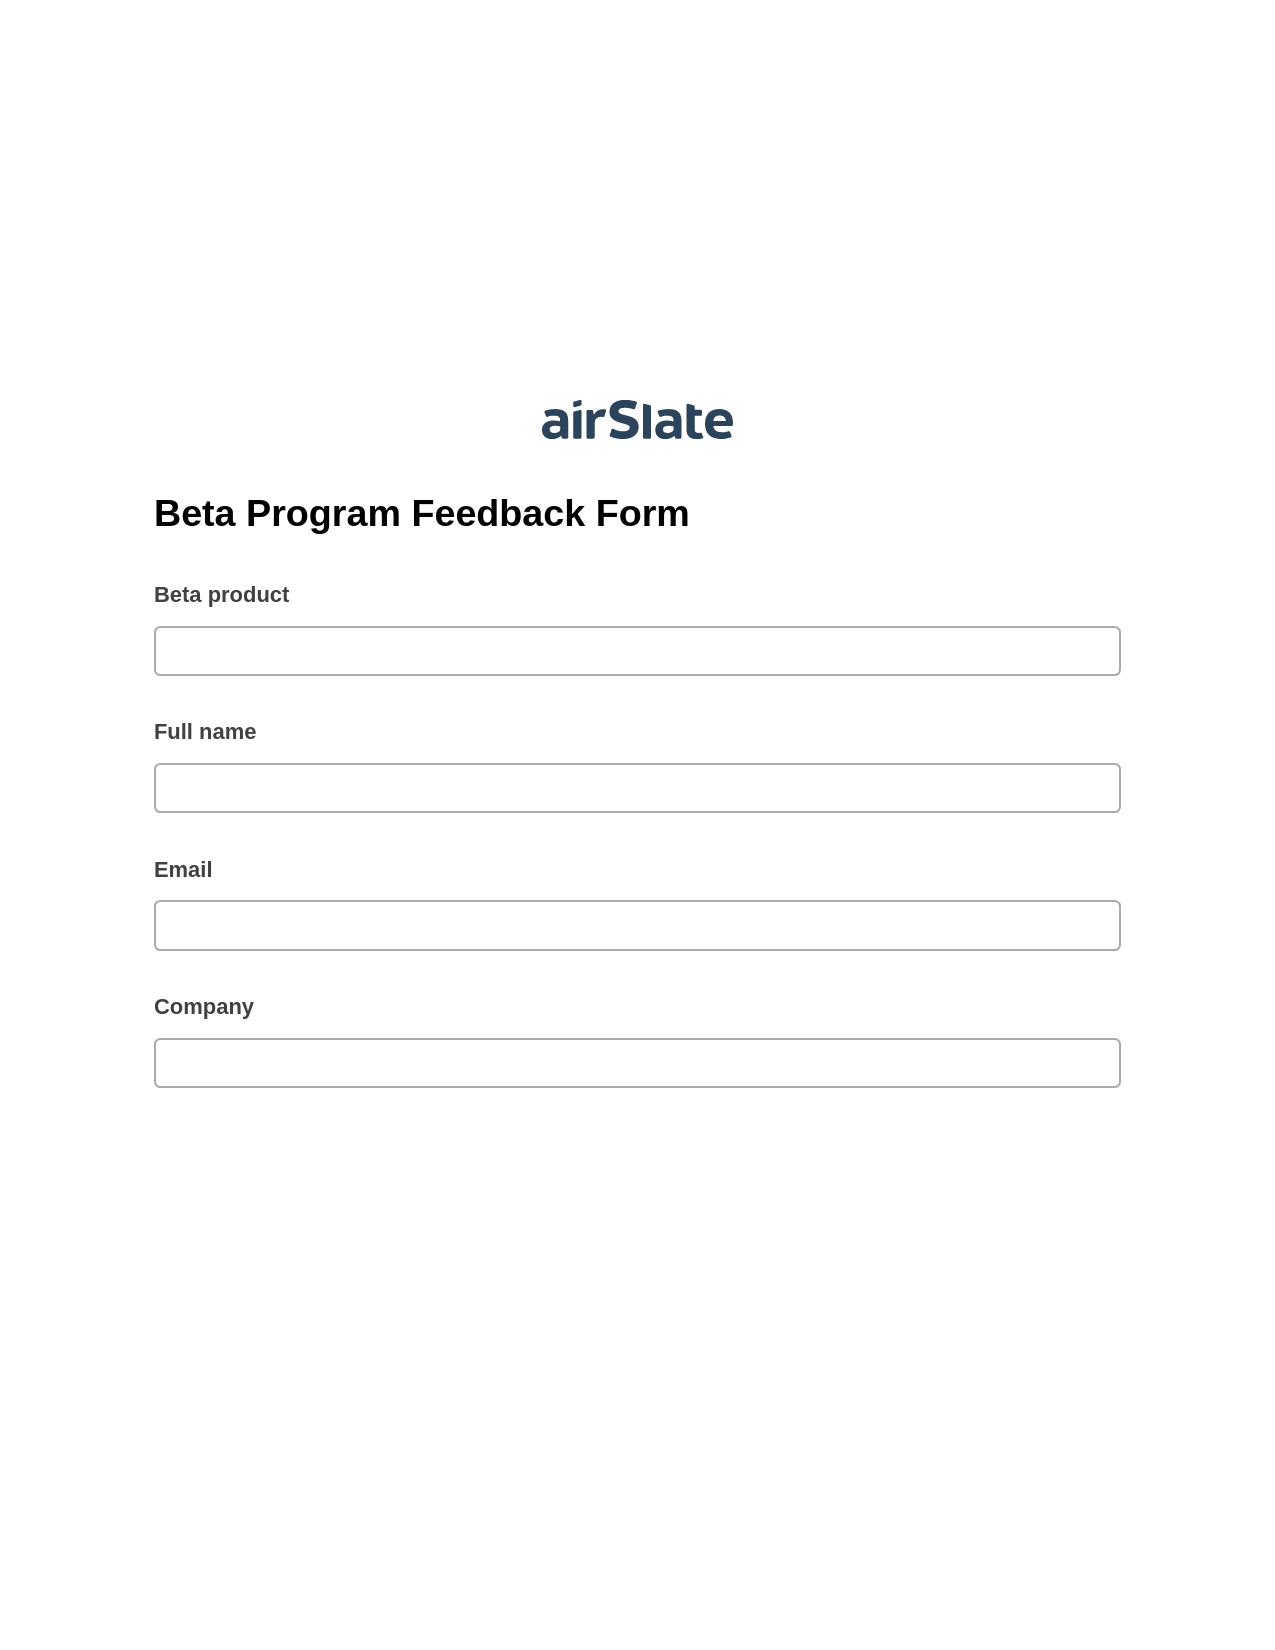 Multirole Beta Program Feedback Form Pre-fill Dropdowns from CSV File Bot, Assign Slate Name Bot, Archive to SharePoint Folder Bot